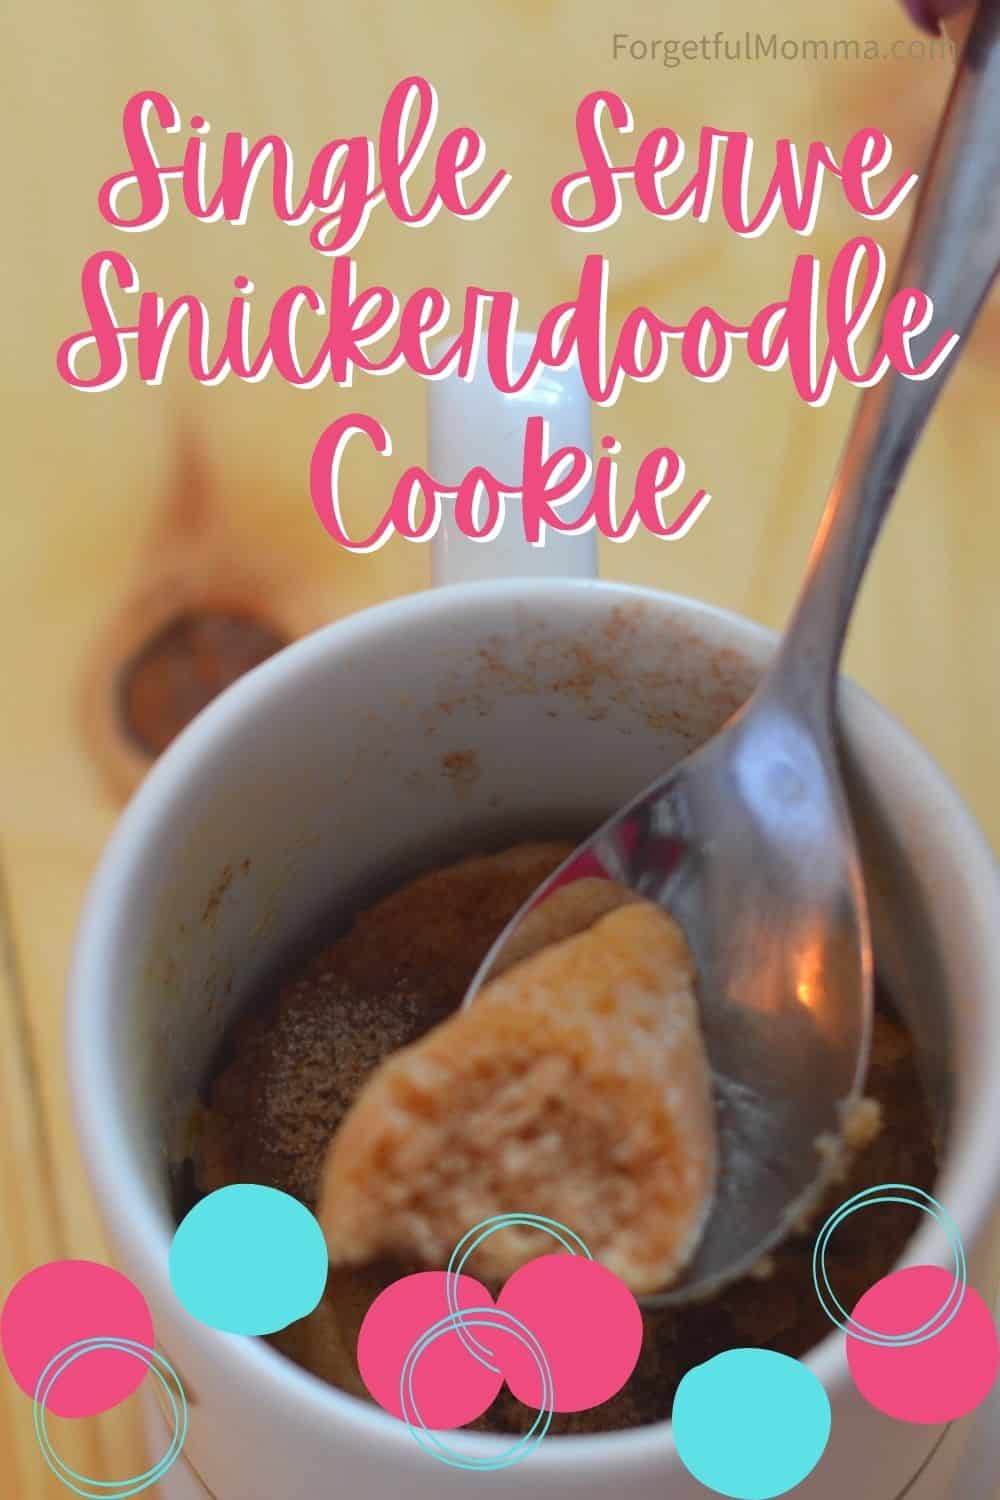 Snickerdoodle Cookie - quick and easy desserts for one